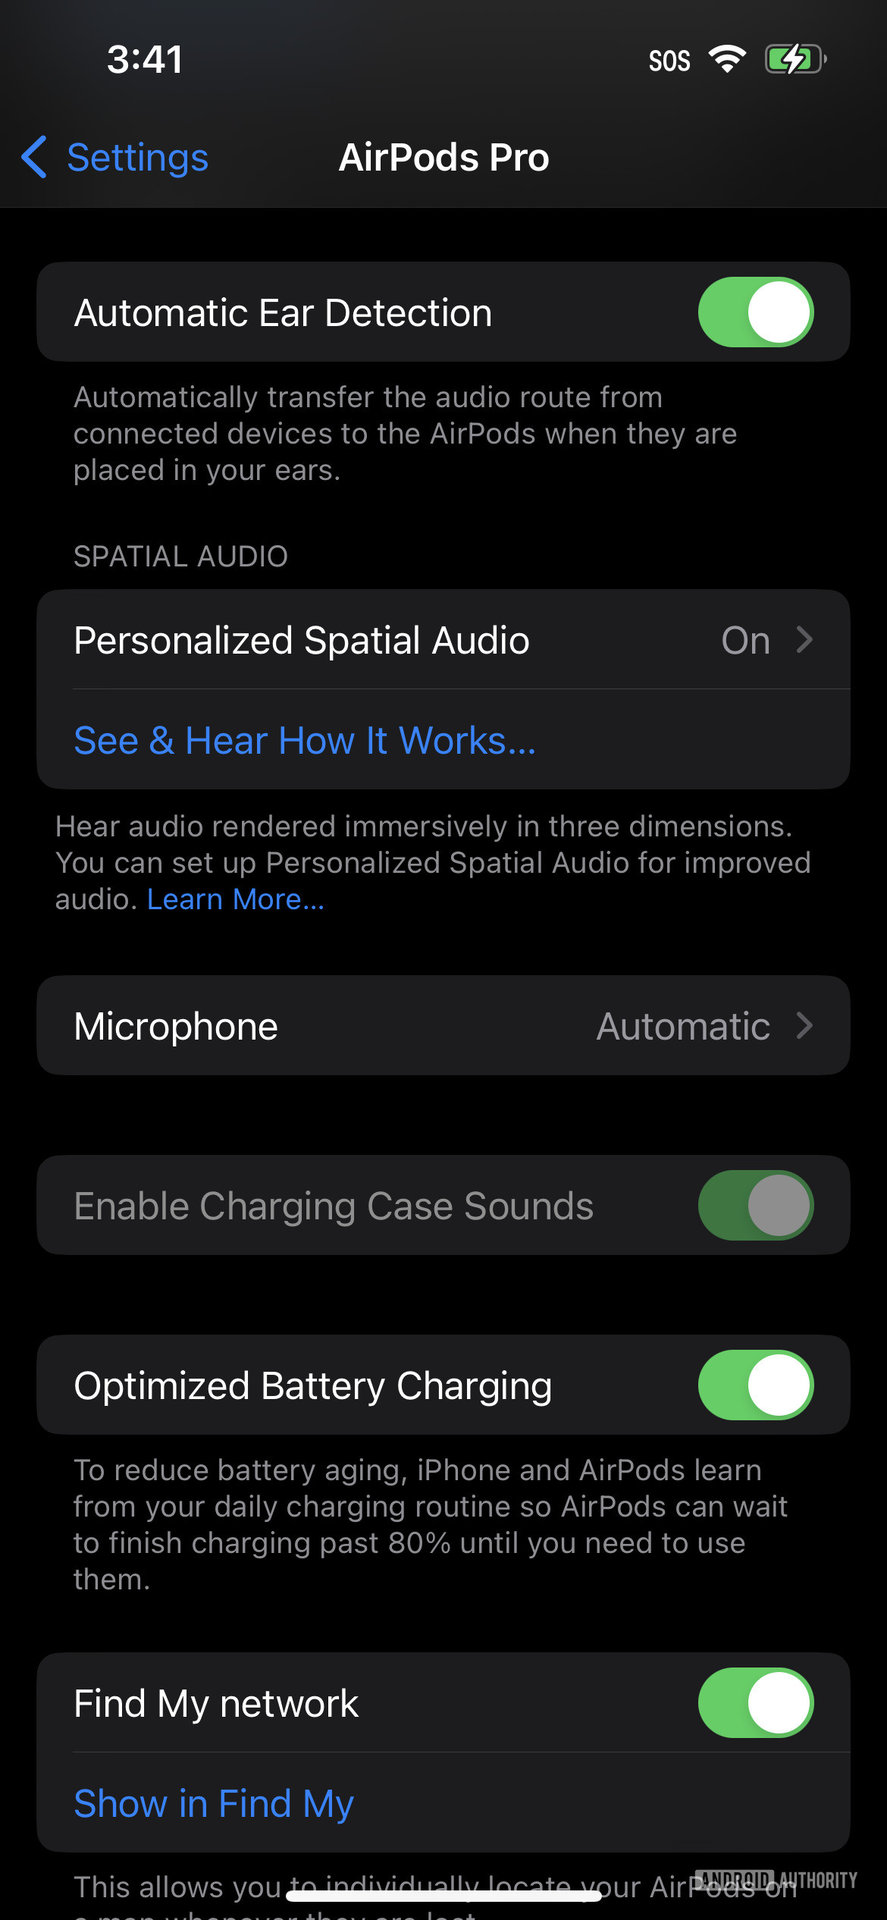 A screenshot of the AirPods Pro 2 settings page in the iPhone Settings app showing the middle portion.